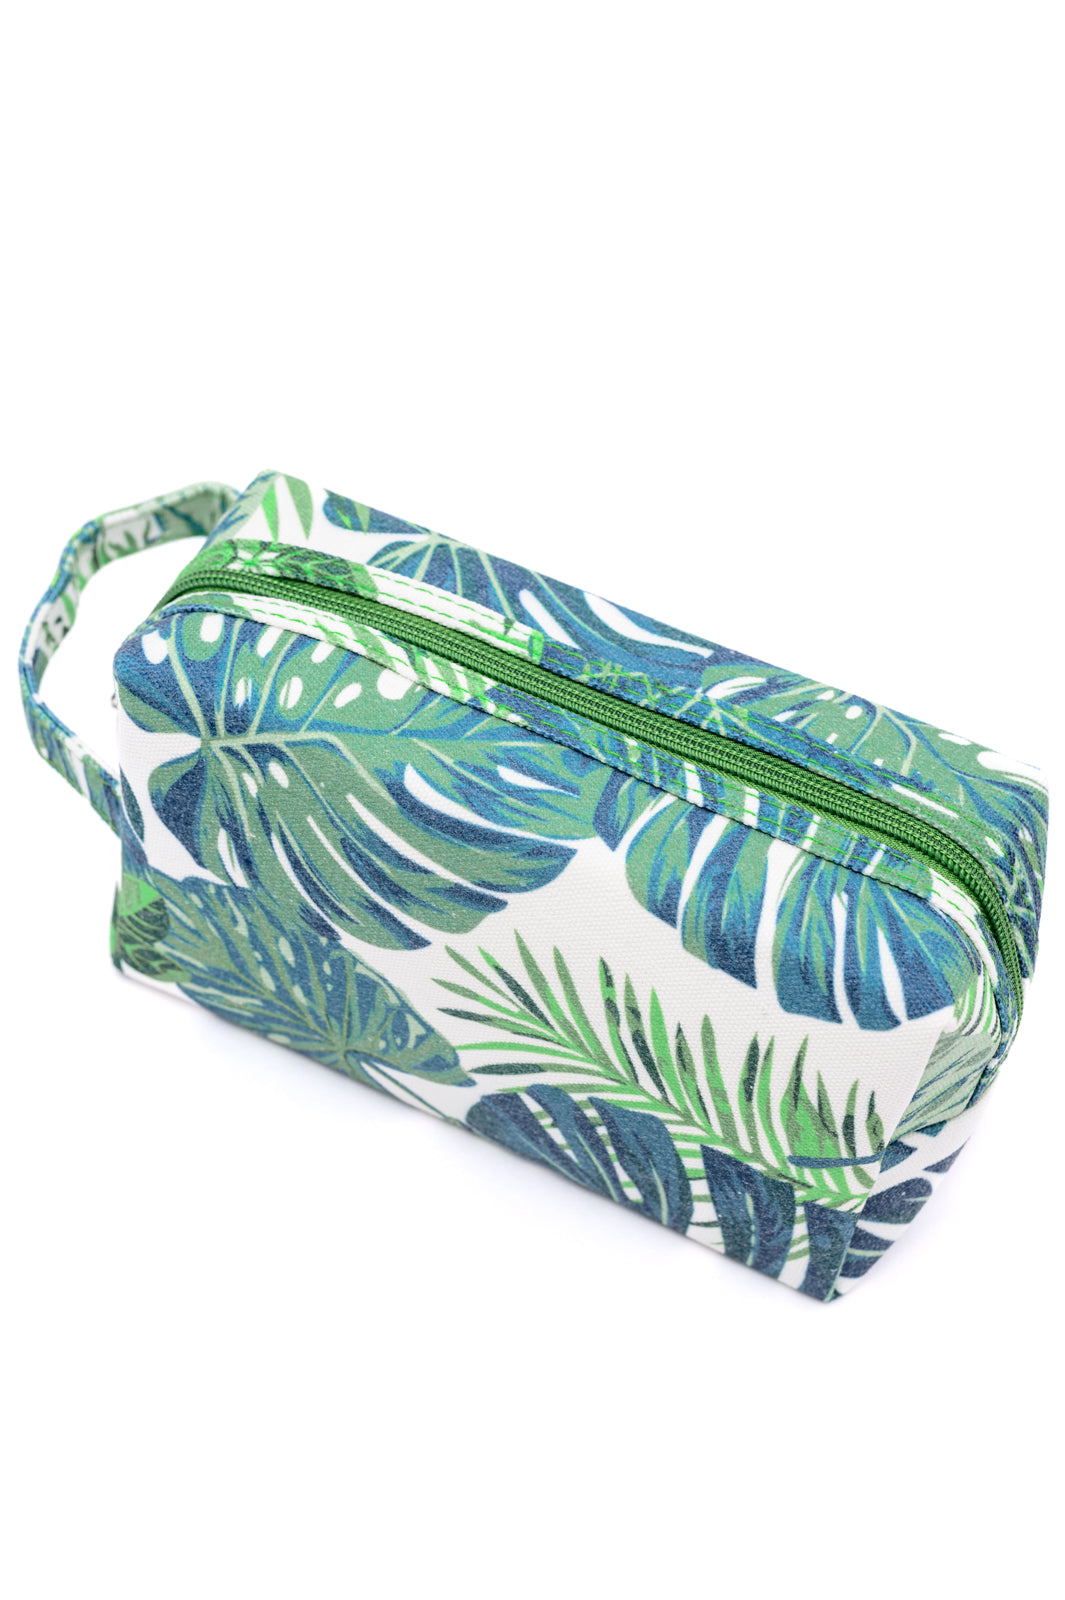 Plant Lover Cosmetic Bags Set of 4 - FamFancy Boutique